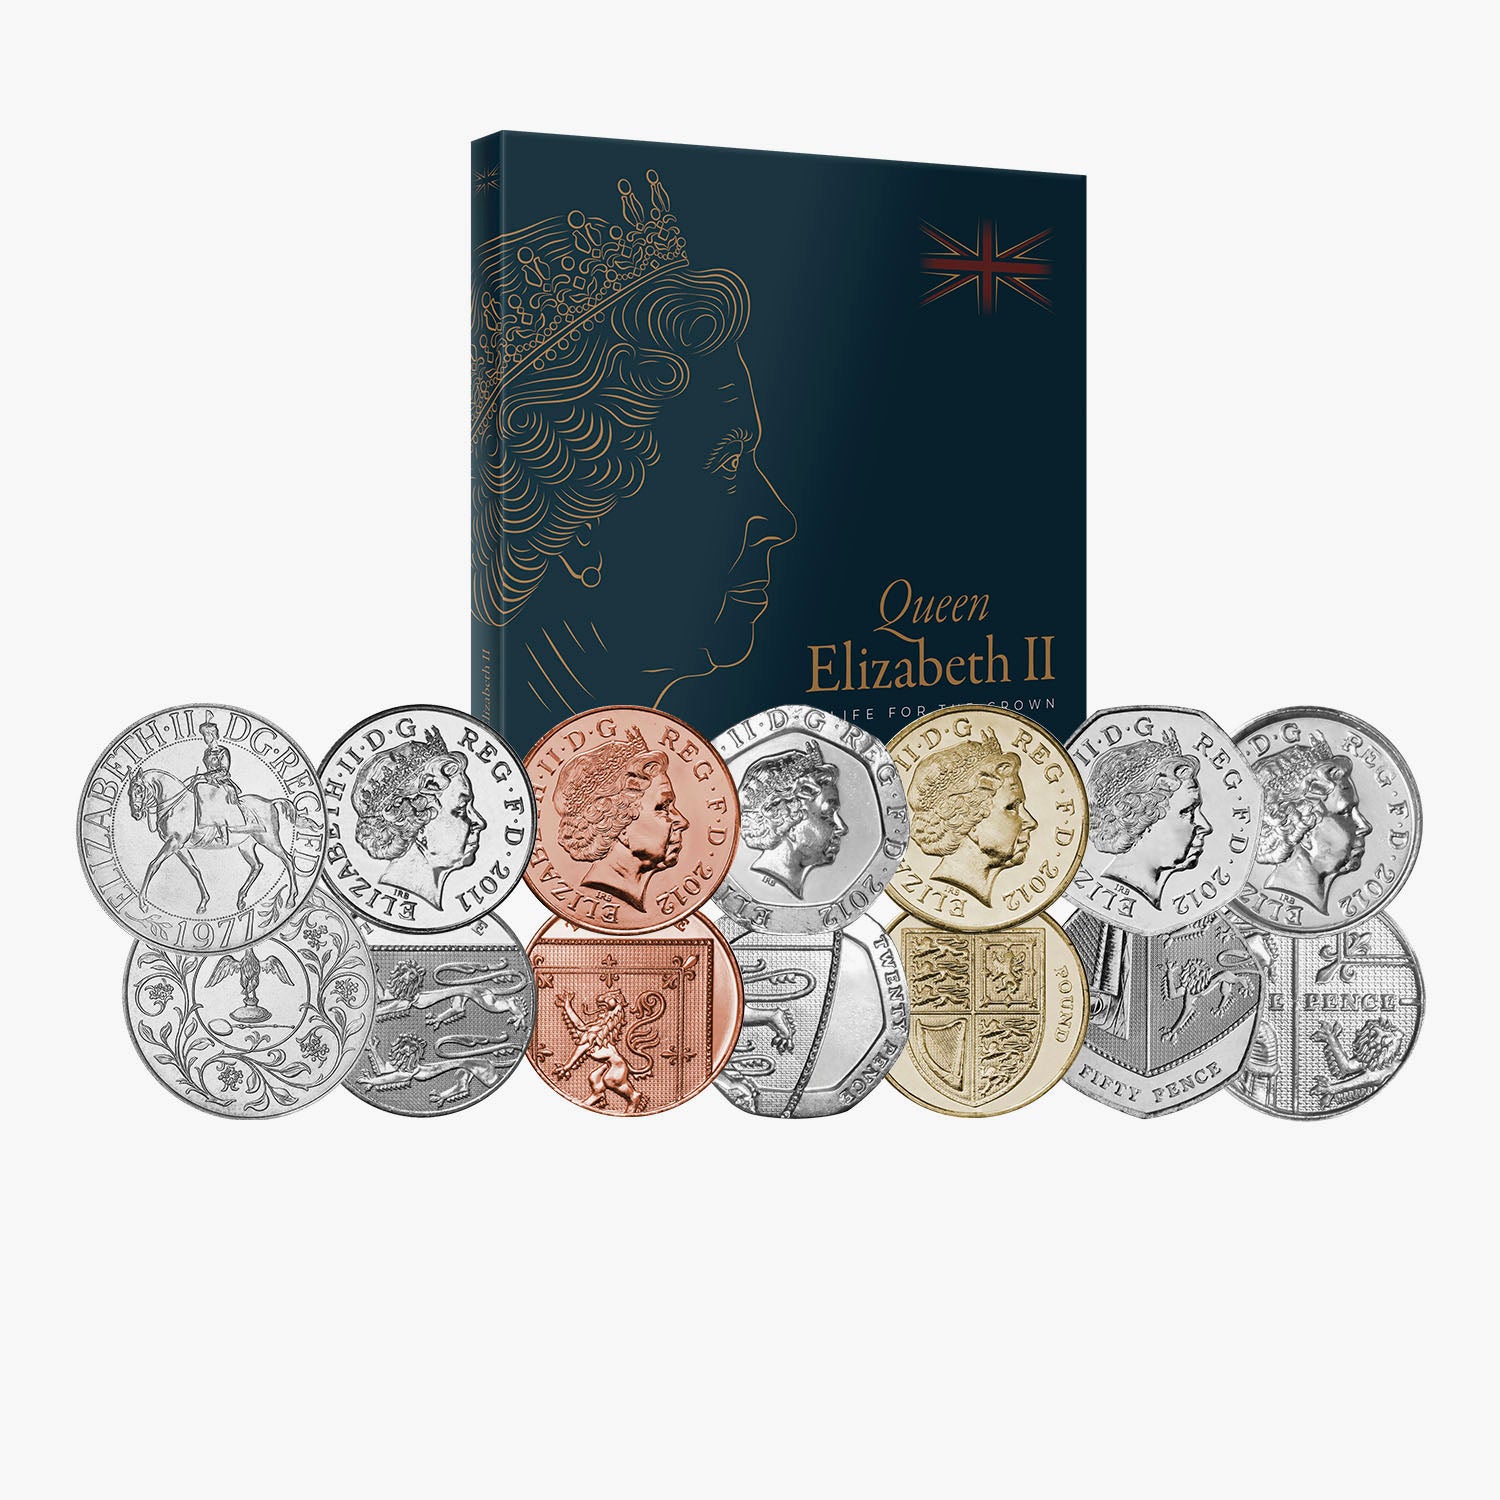 The Royal Coat of Arms Premium Coin Set